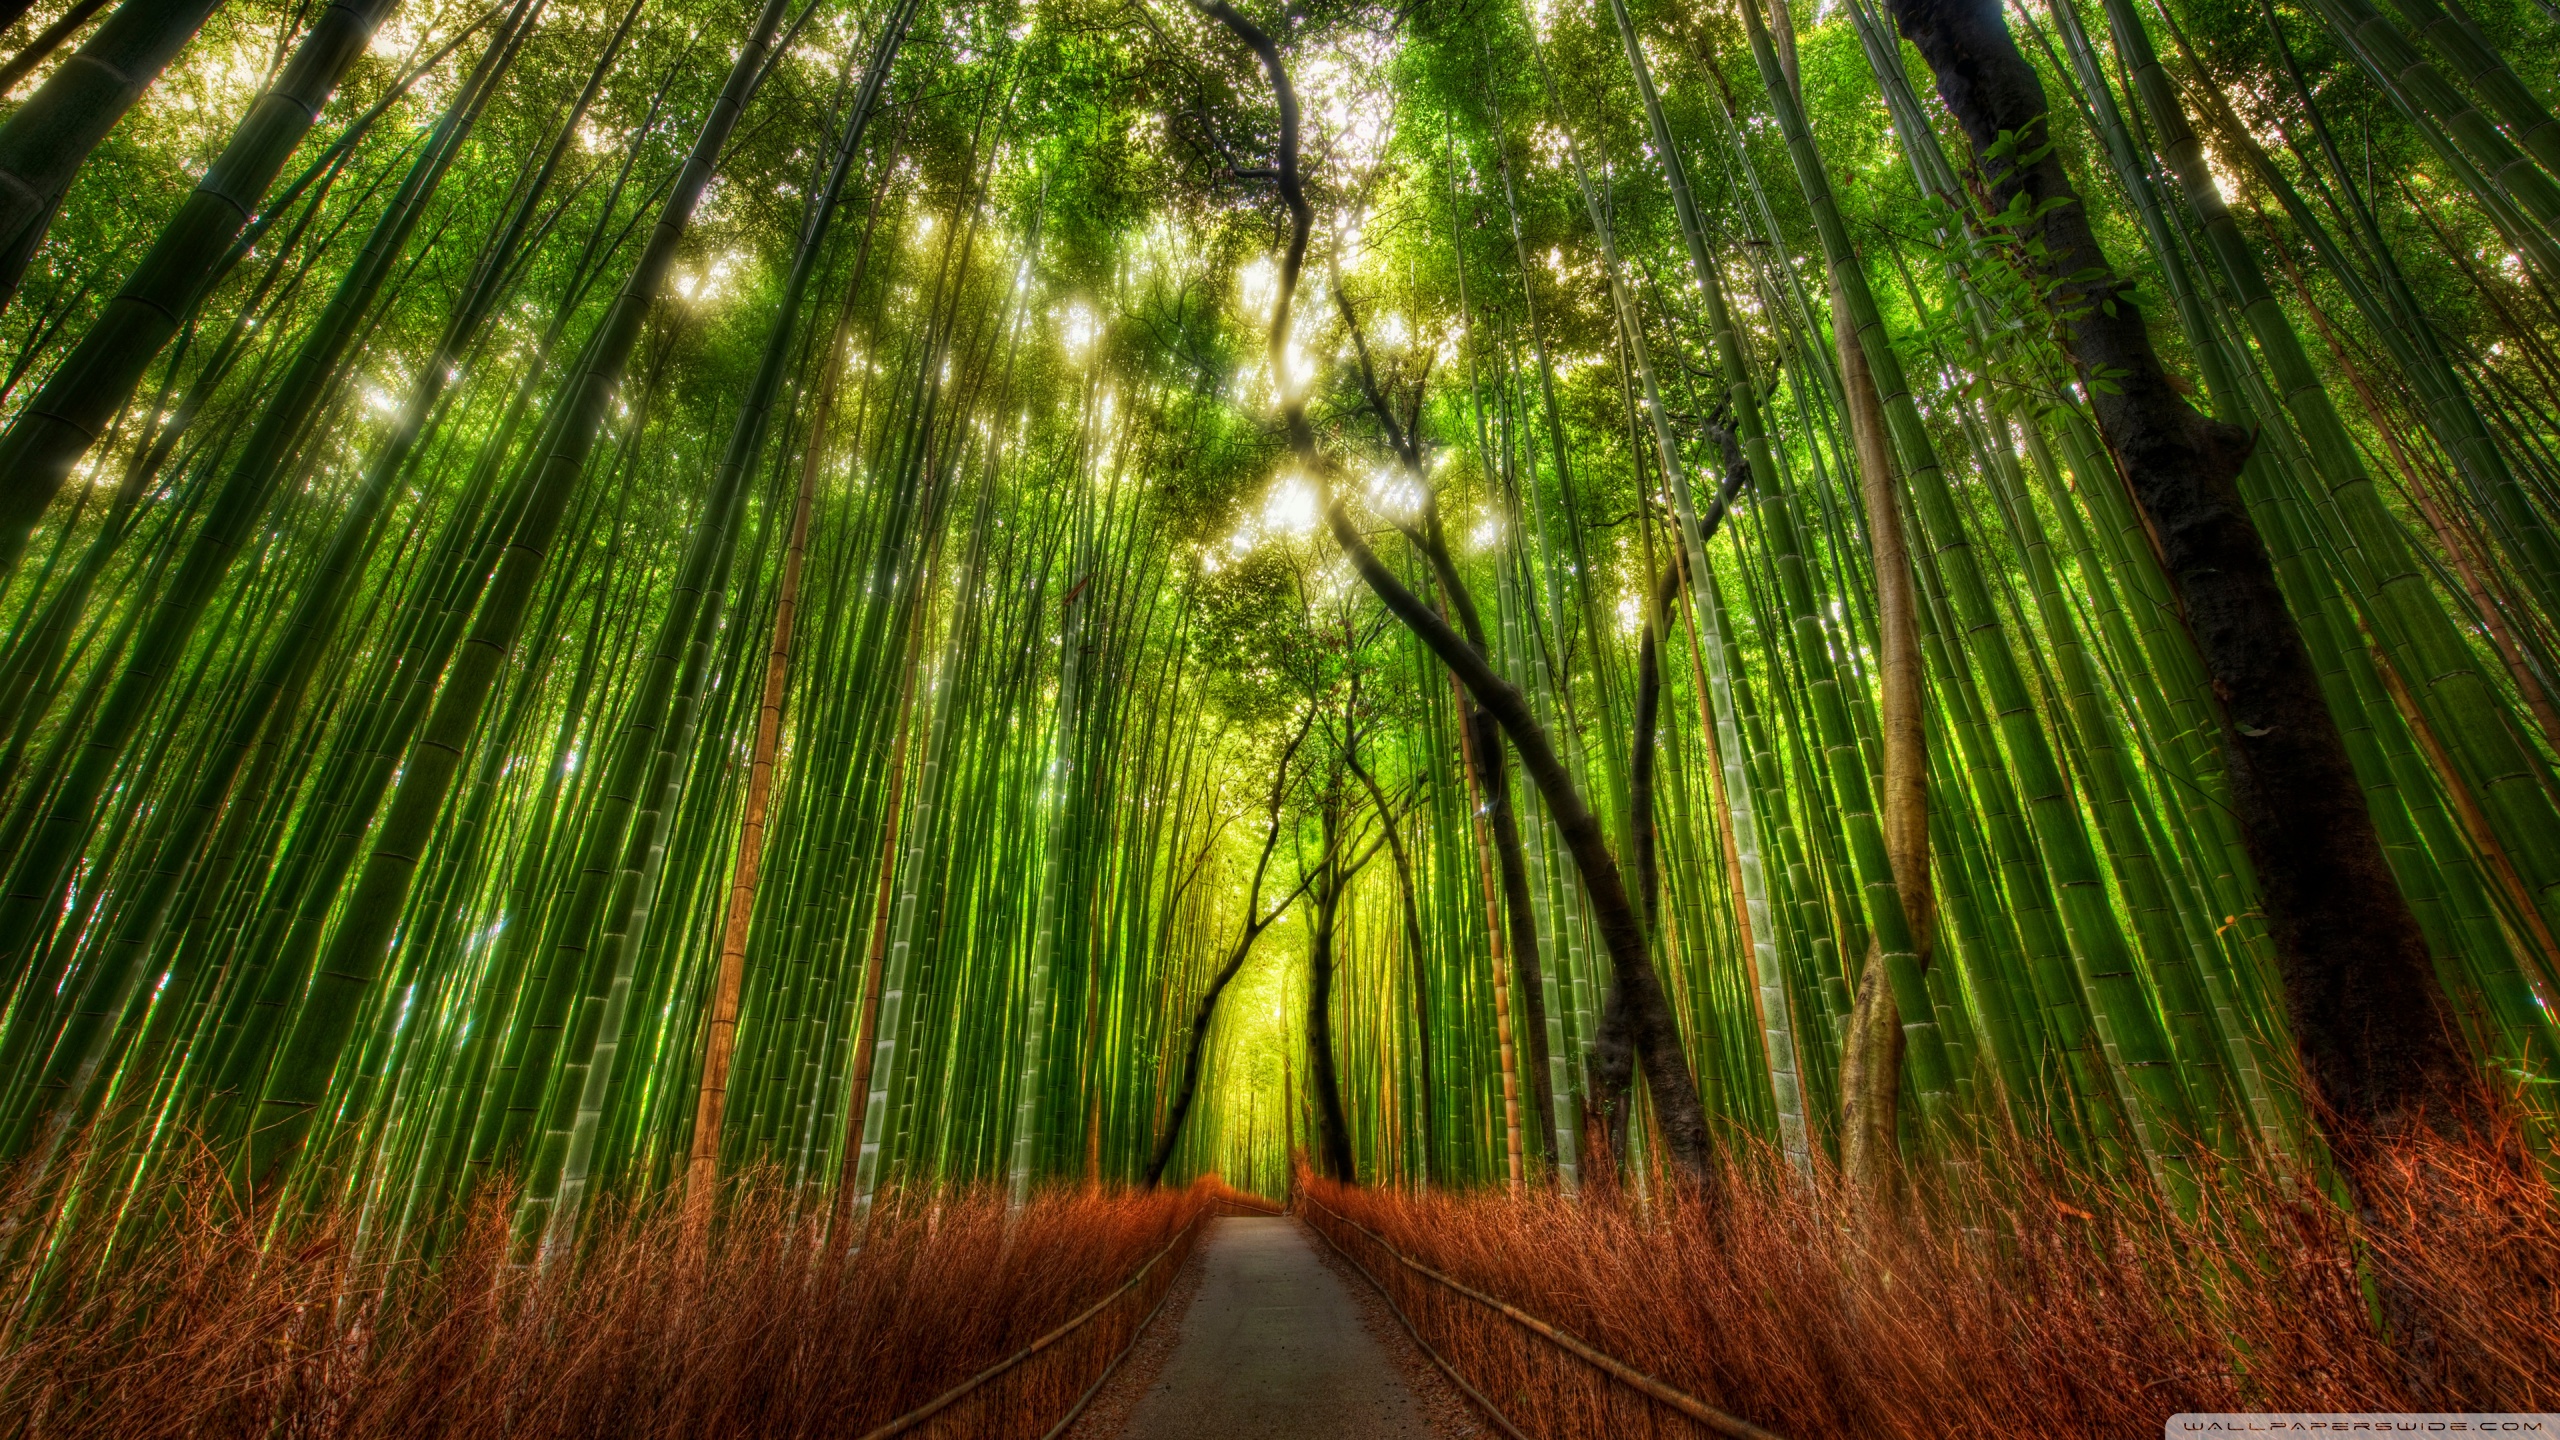 Desktop Wallpaper Bamboo Forest Hd Image Picture Background 7zik F